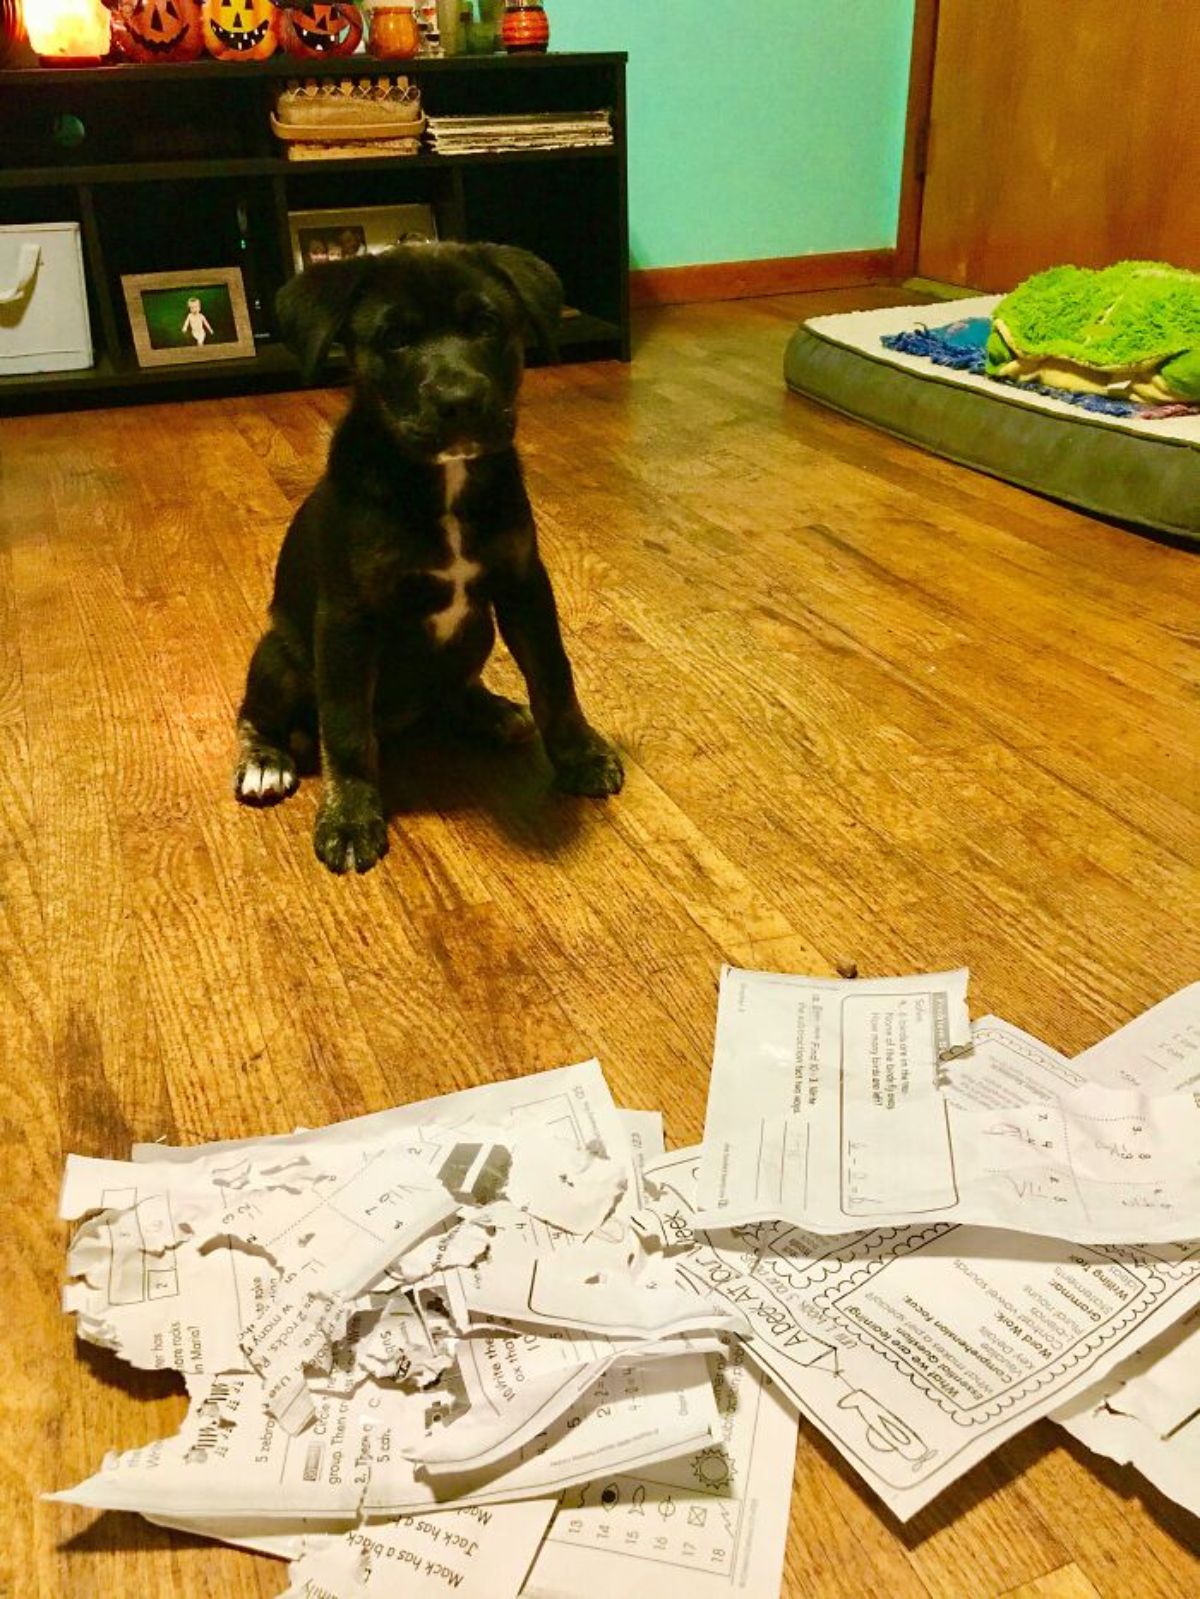 black and white puppy sitting on the floor with some ripped up papers in front of it